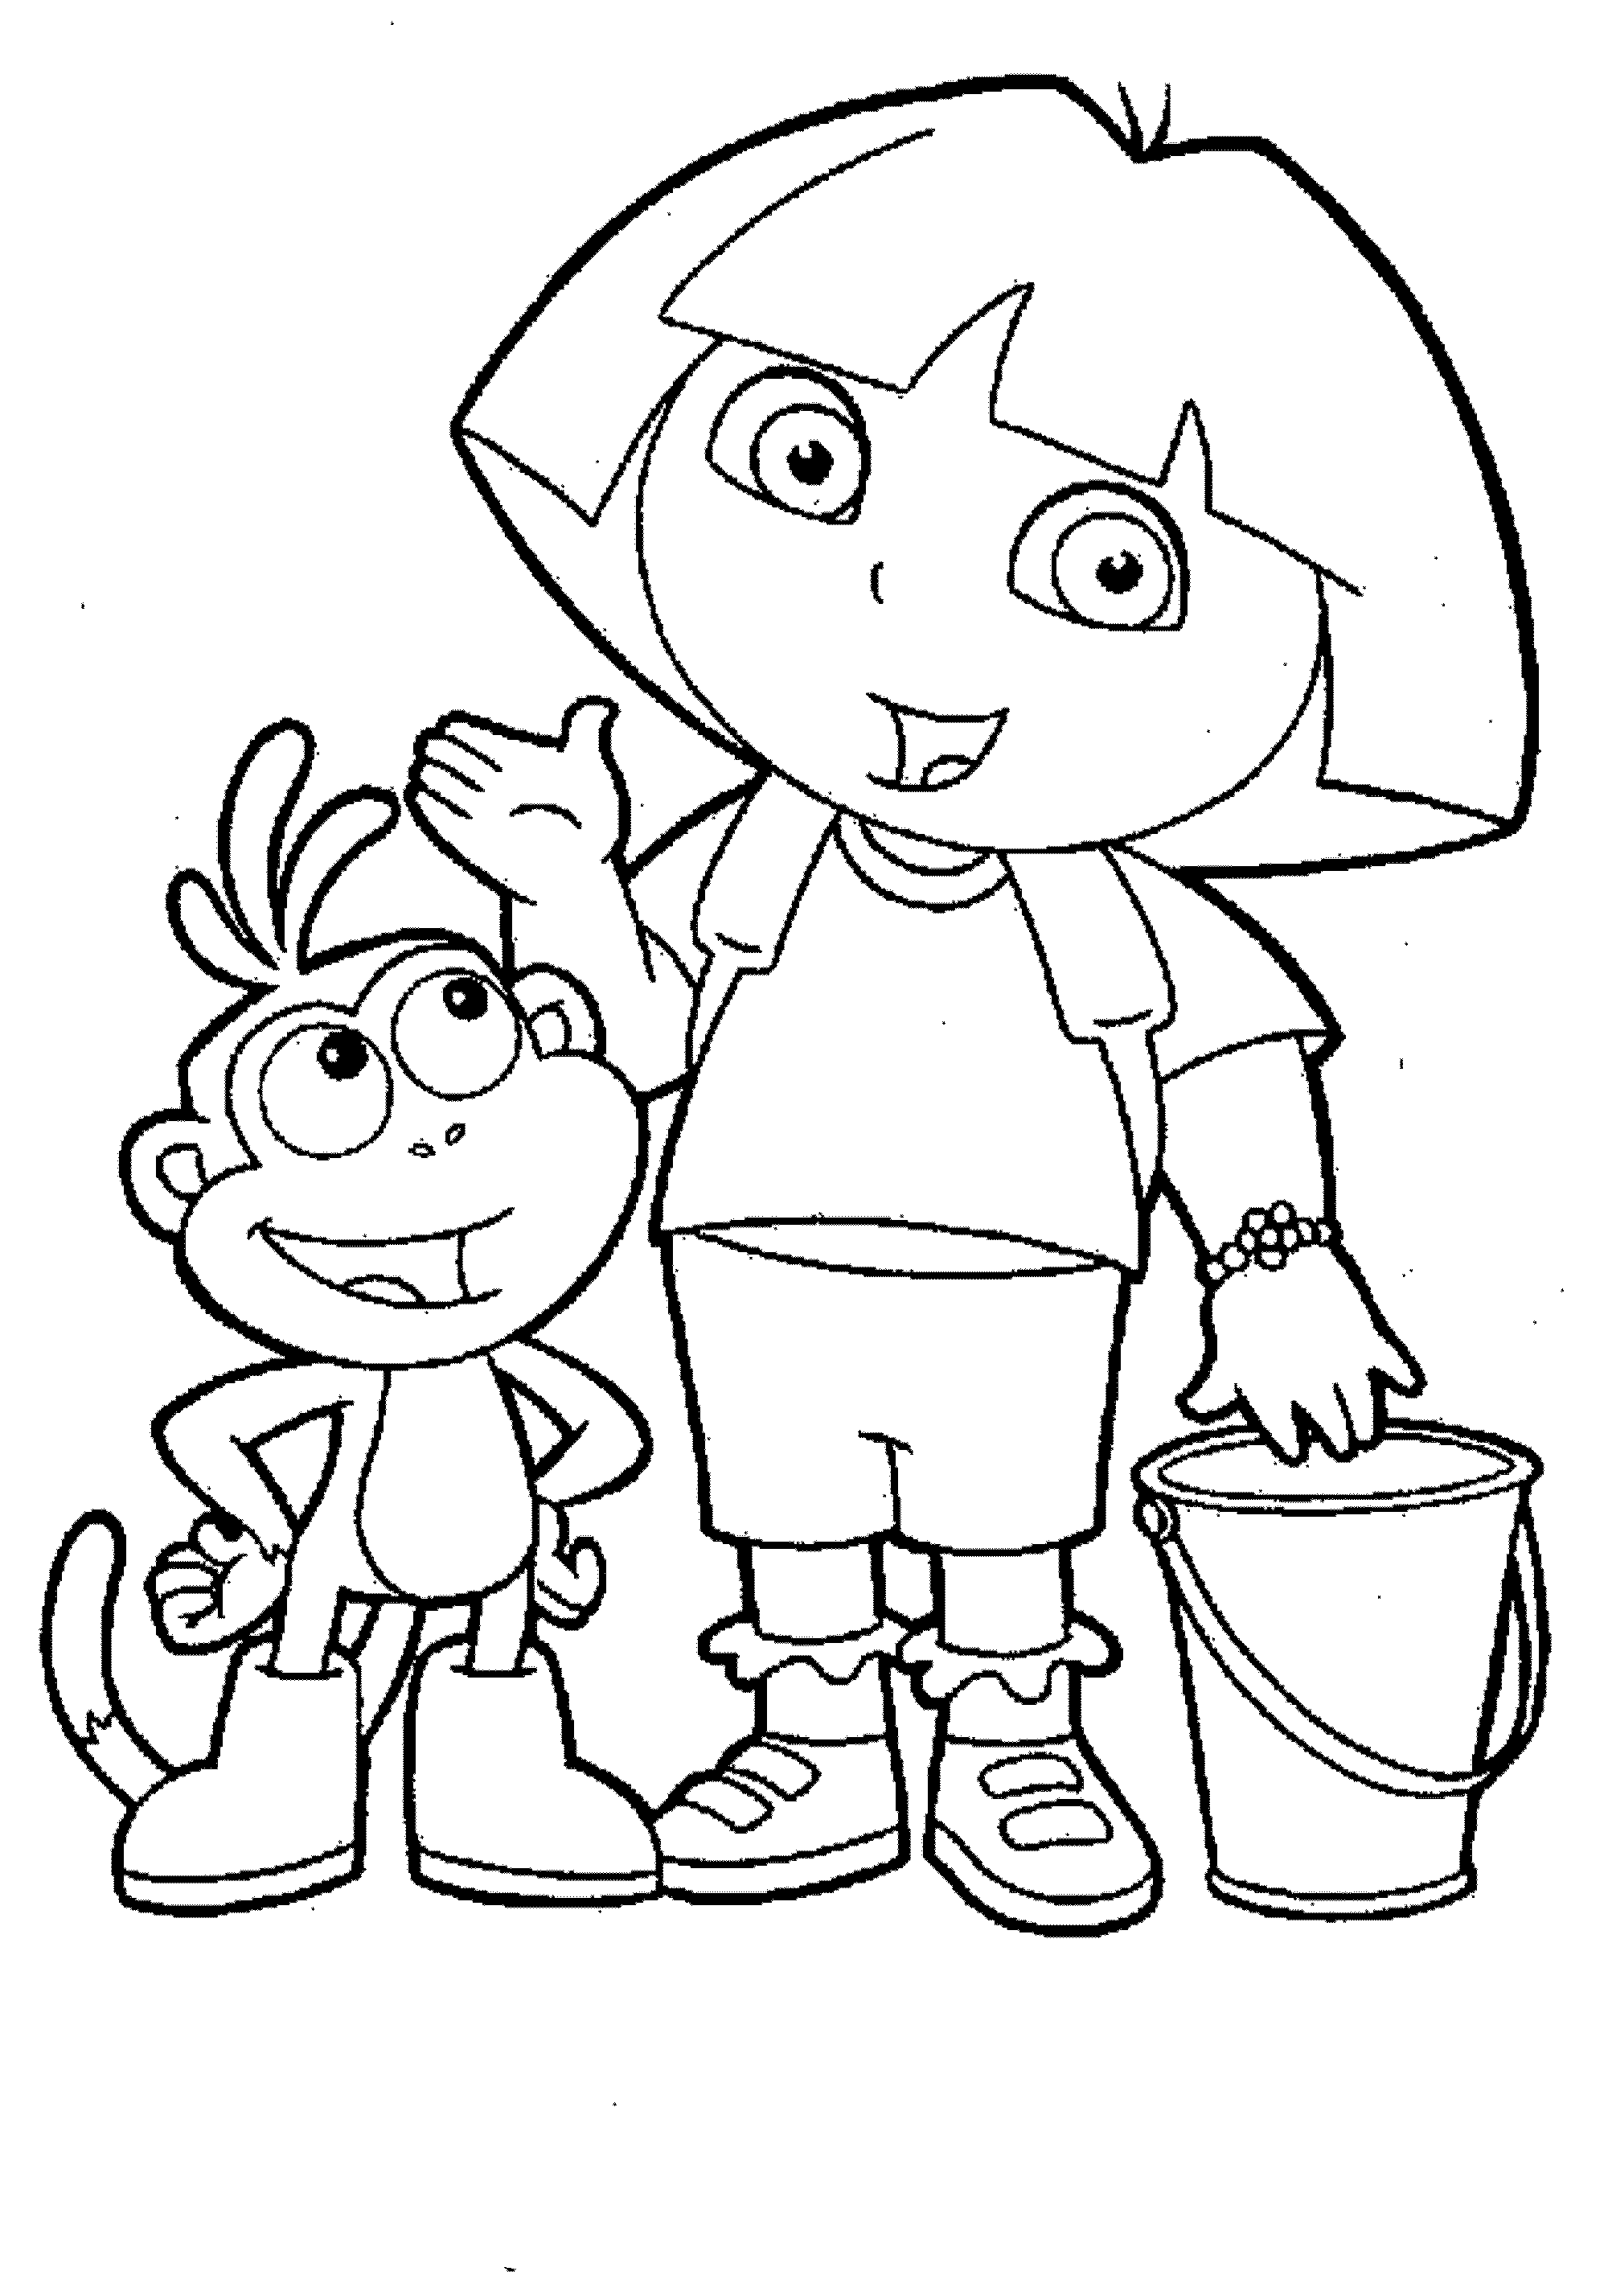 Dora Coloring Pages Free Printable - Printable Word Searches